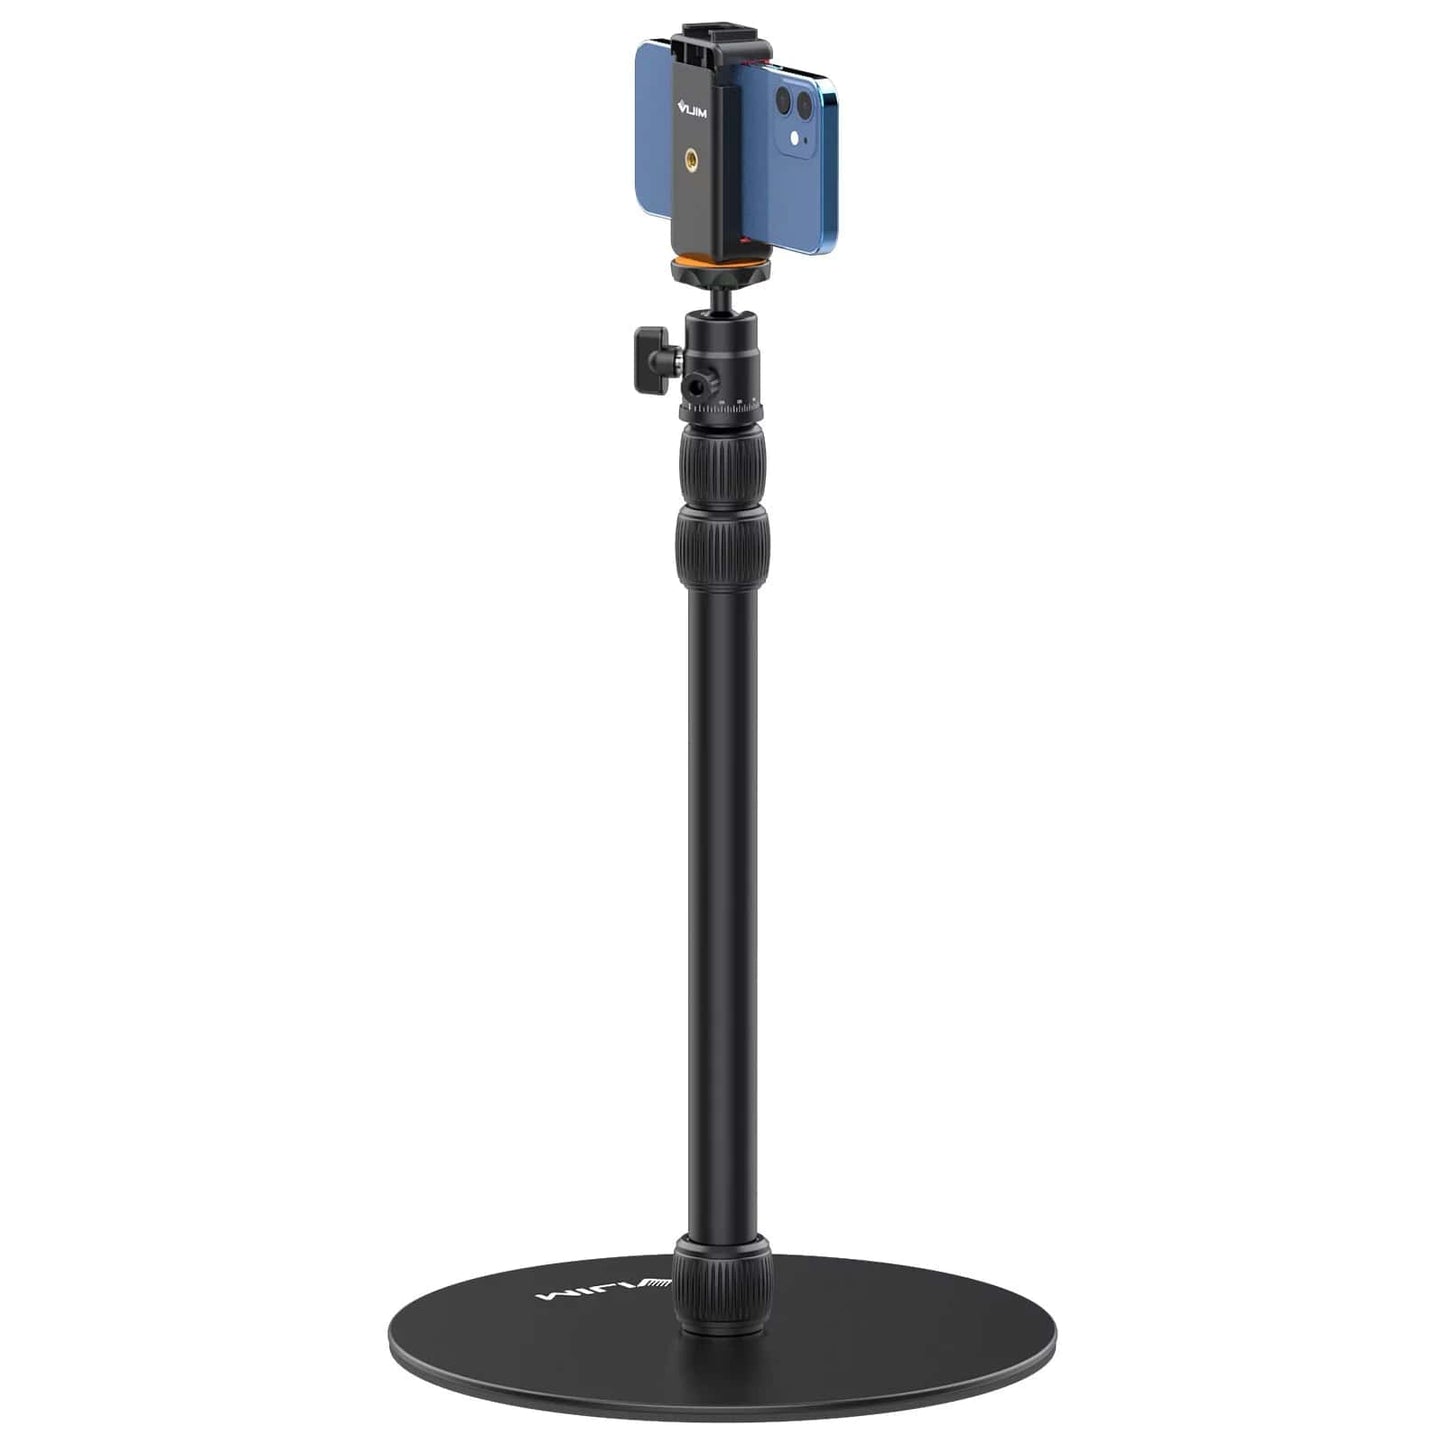 Vijim by Ulanzi LS09 Extendable Heavy Base Stand with 1/4-inch Ball Mount, Smartphone Clip, and Action Cam Adapter for Cameras and Lights | 2952